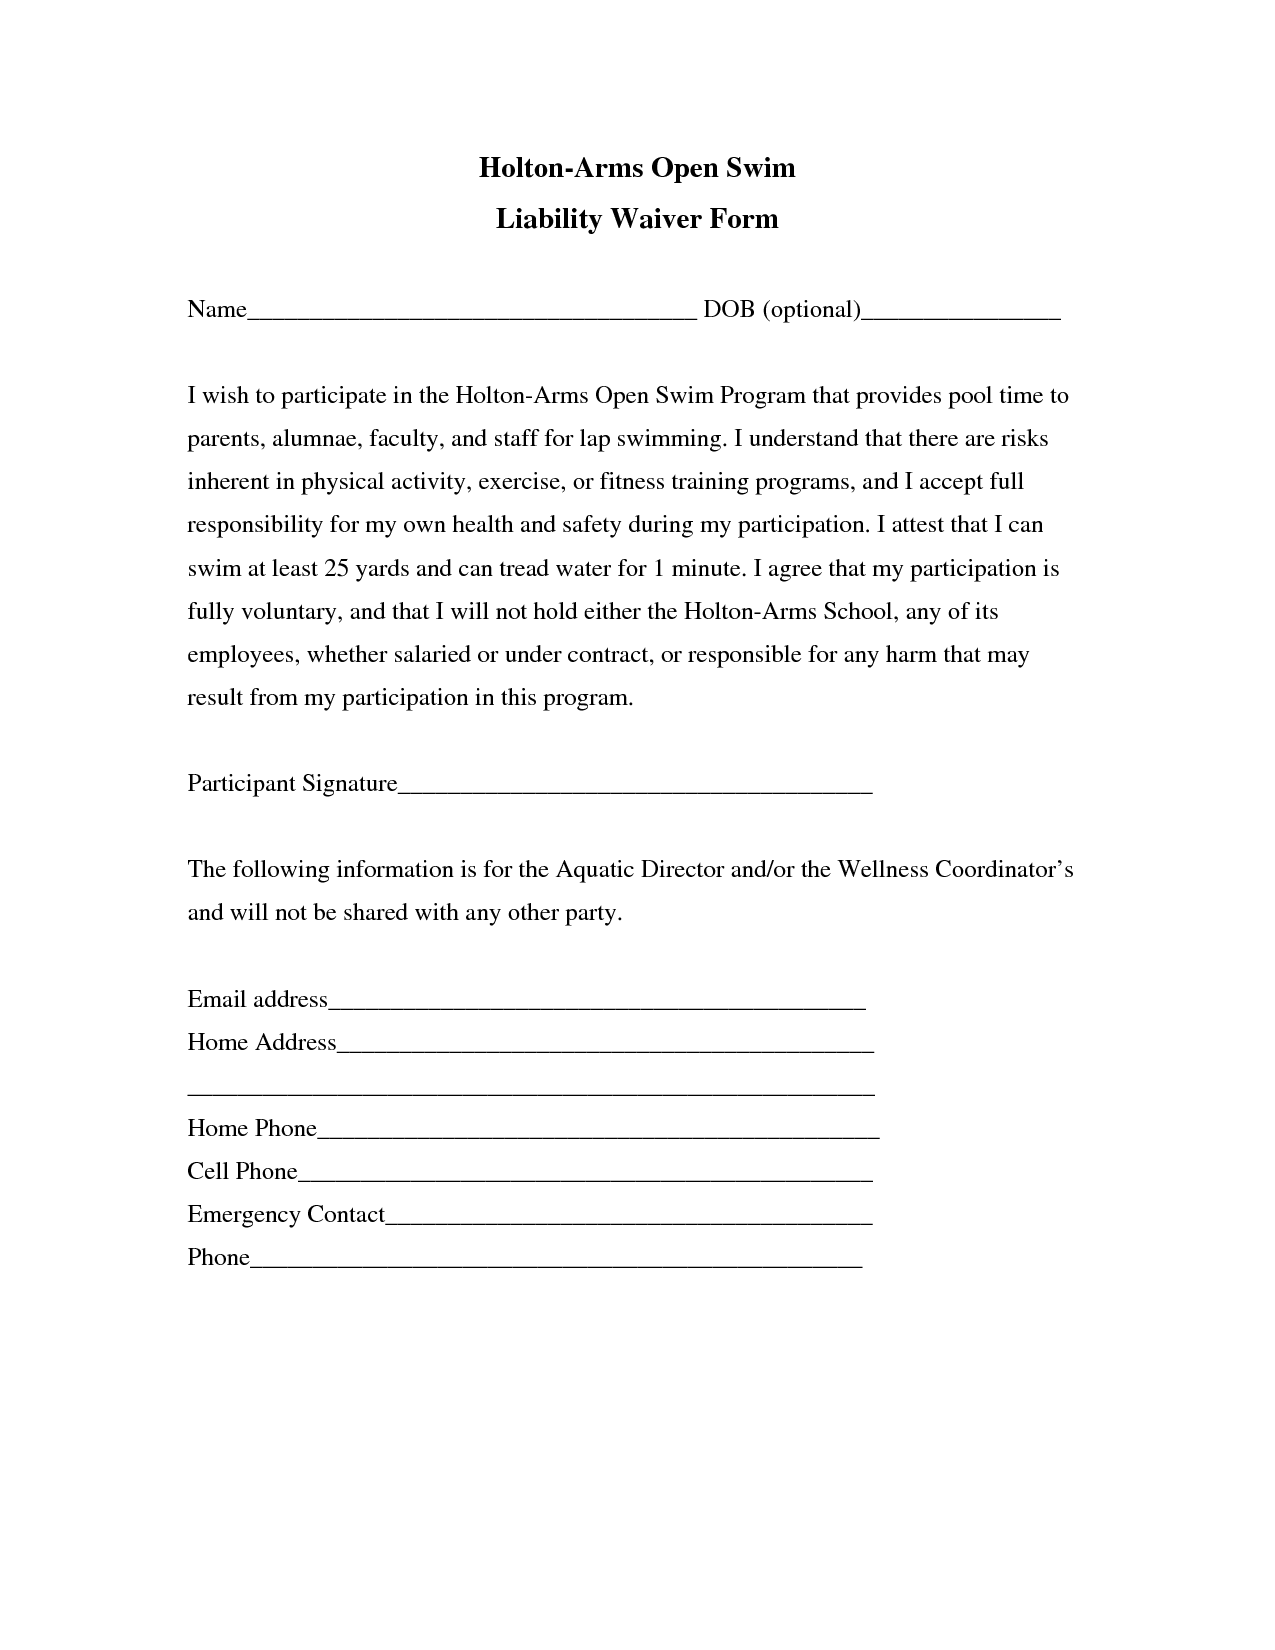 liability-waiver-form-sample-free-printable-documents